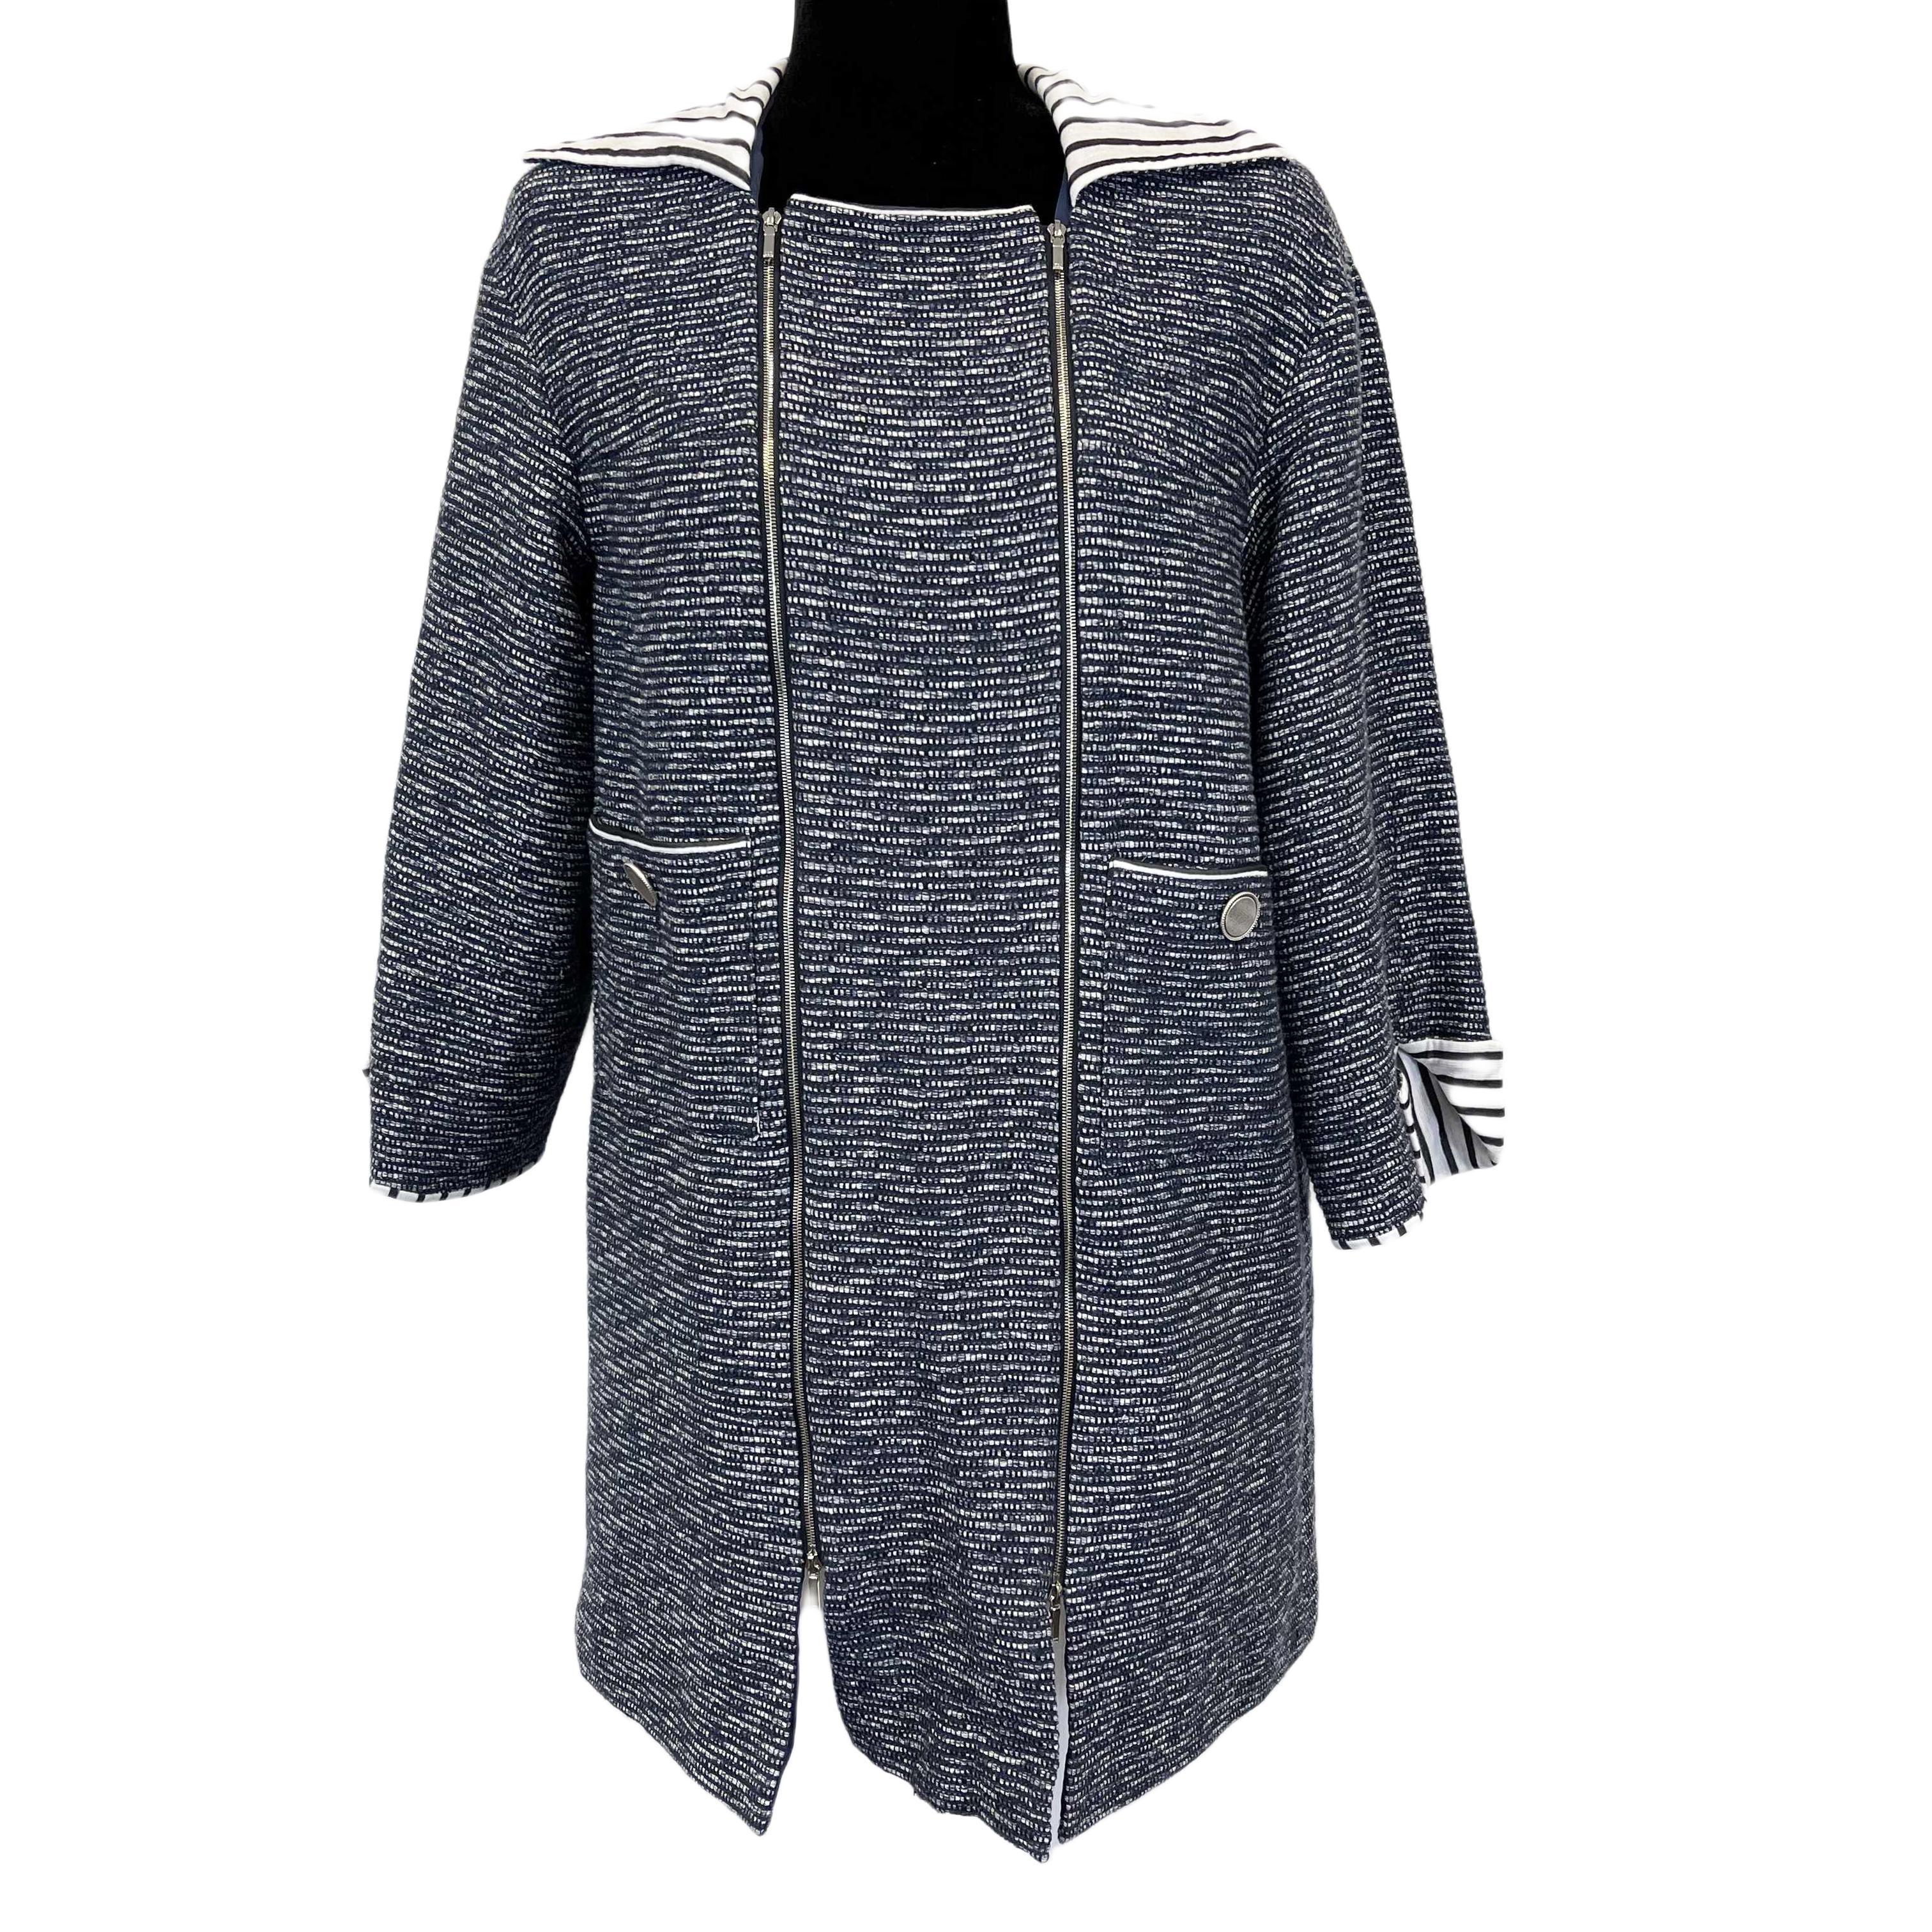 CHANEL- Spring 2017 Fantasy Tweed Coat - Navy & White - 38 US 6 NWT In New Condition For Sale In Sanford, FL